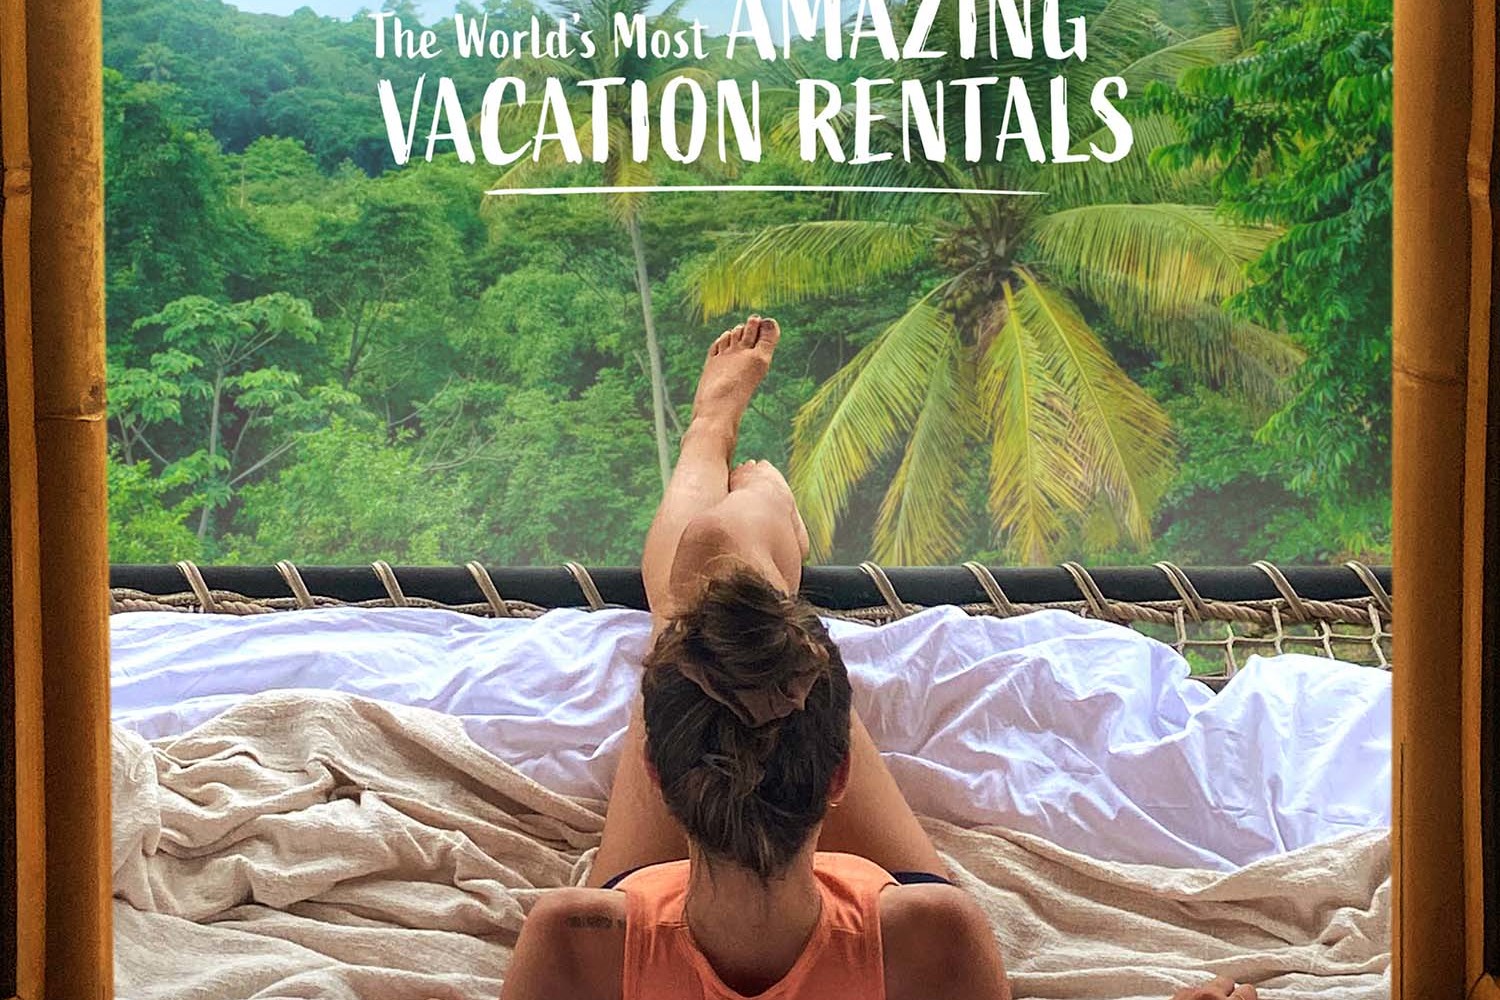 The Worlds Most Amazing Vacation Rentals